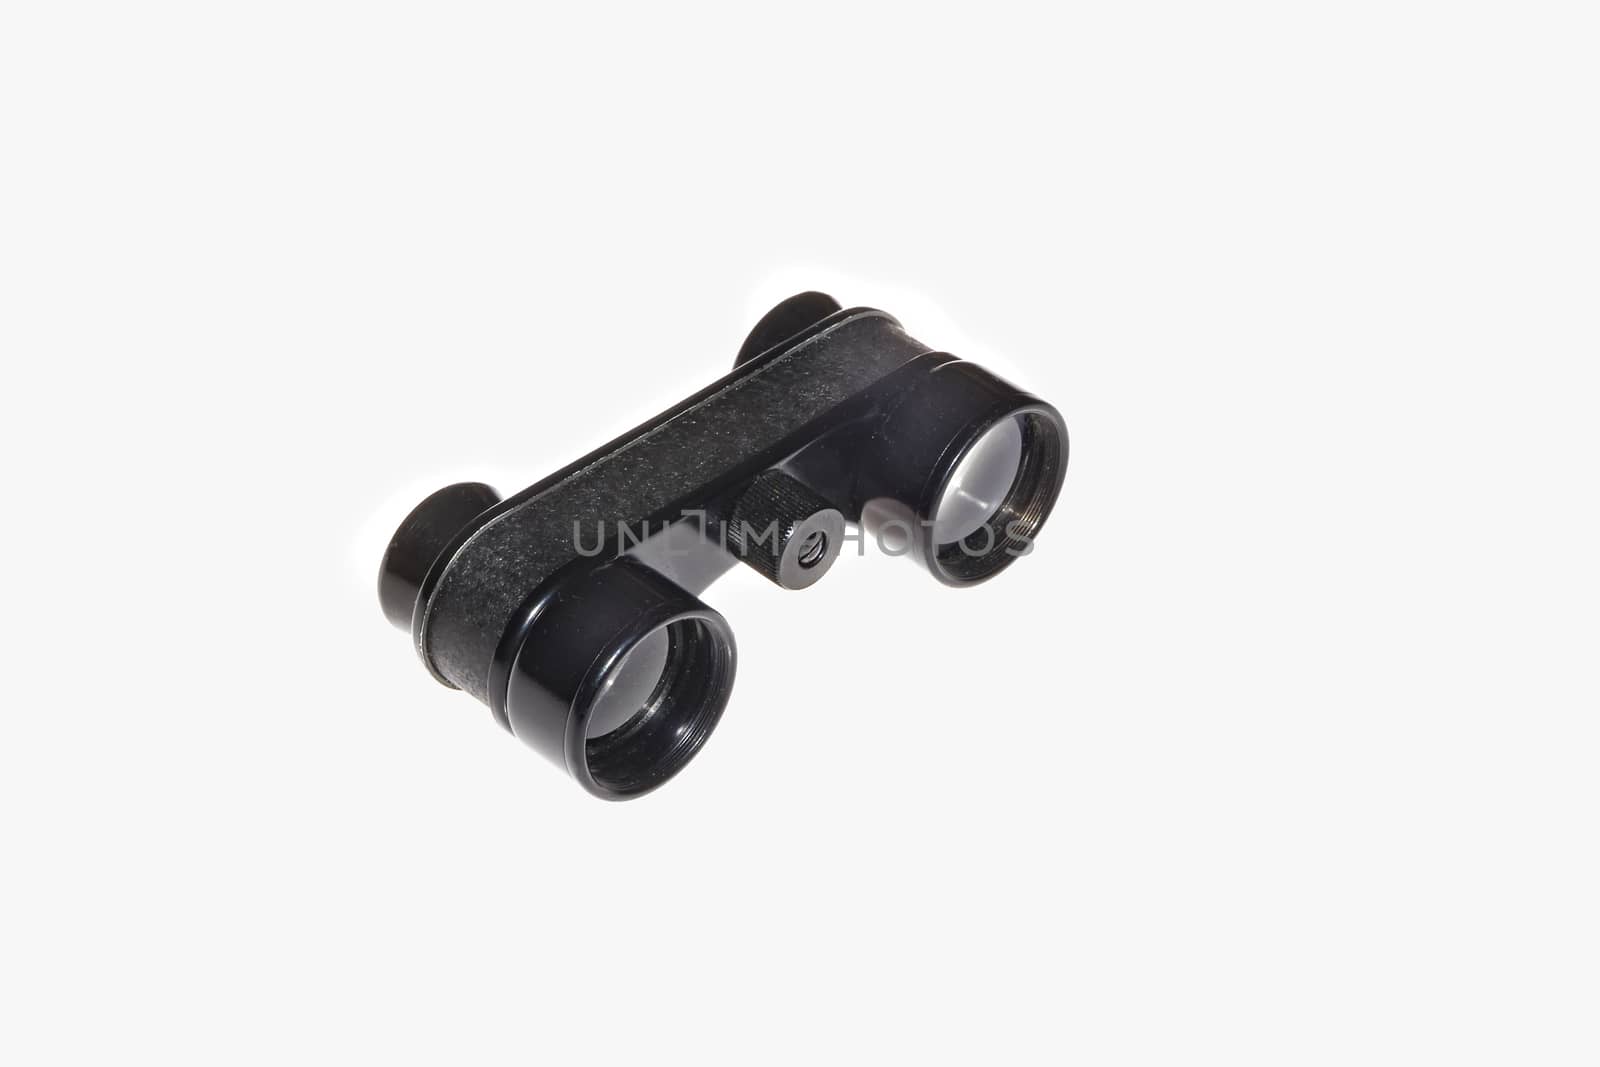 Binoculars isolated on the white background. Sideways view